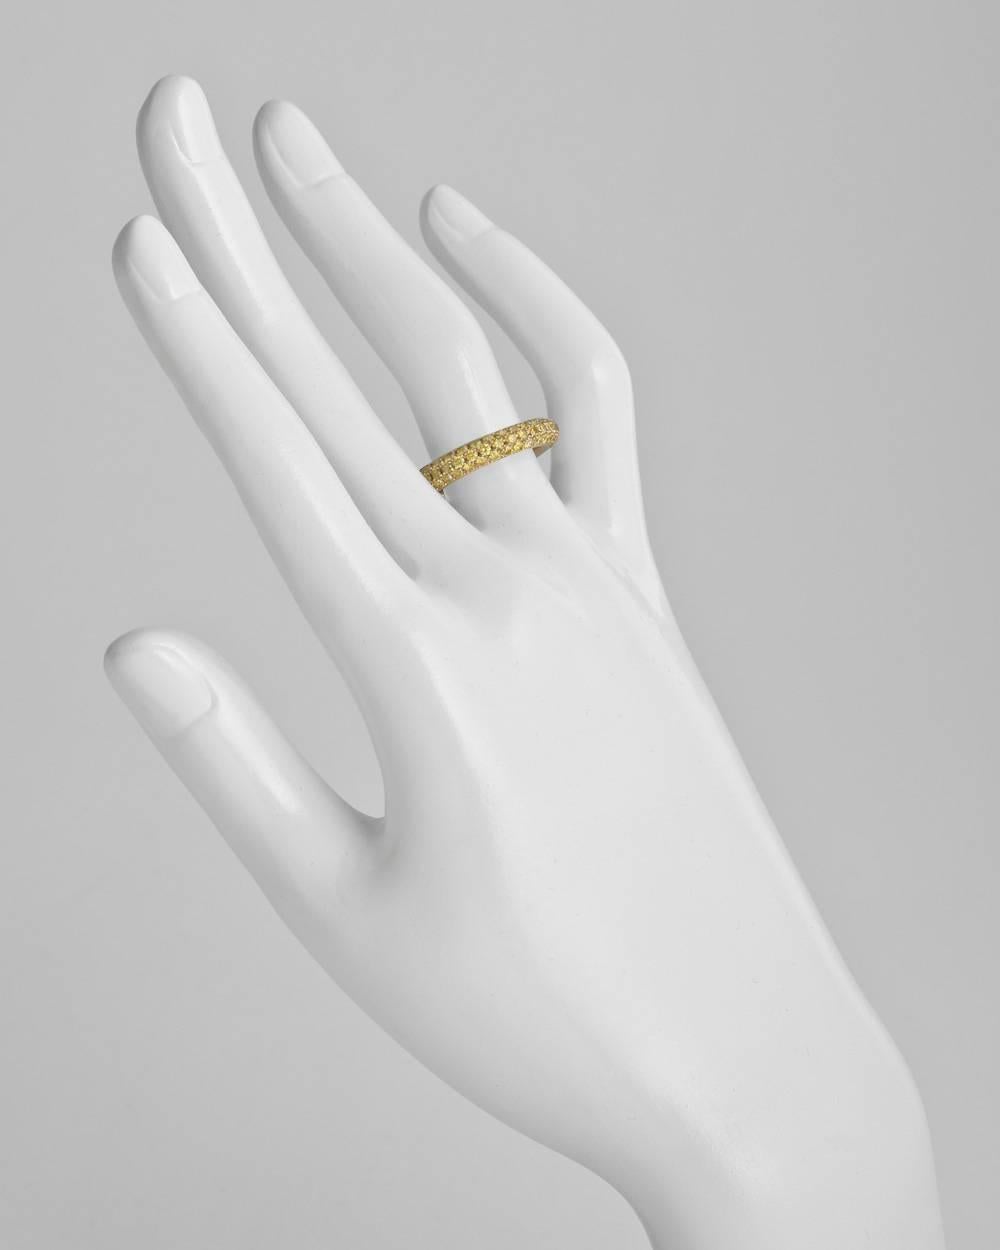 Yellow diamond domed band ring, showcasing three rows of pavé-set natural fancy intense yellow diamonds weighing approximately 2.41 total carats, mounted in 18k yellow gold, signed Daniel K. 4mm band width. Size 6.
